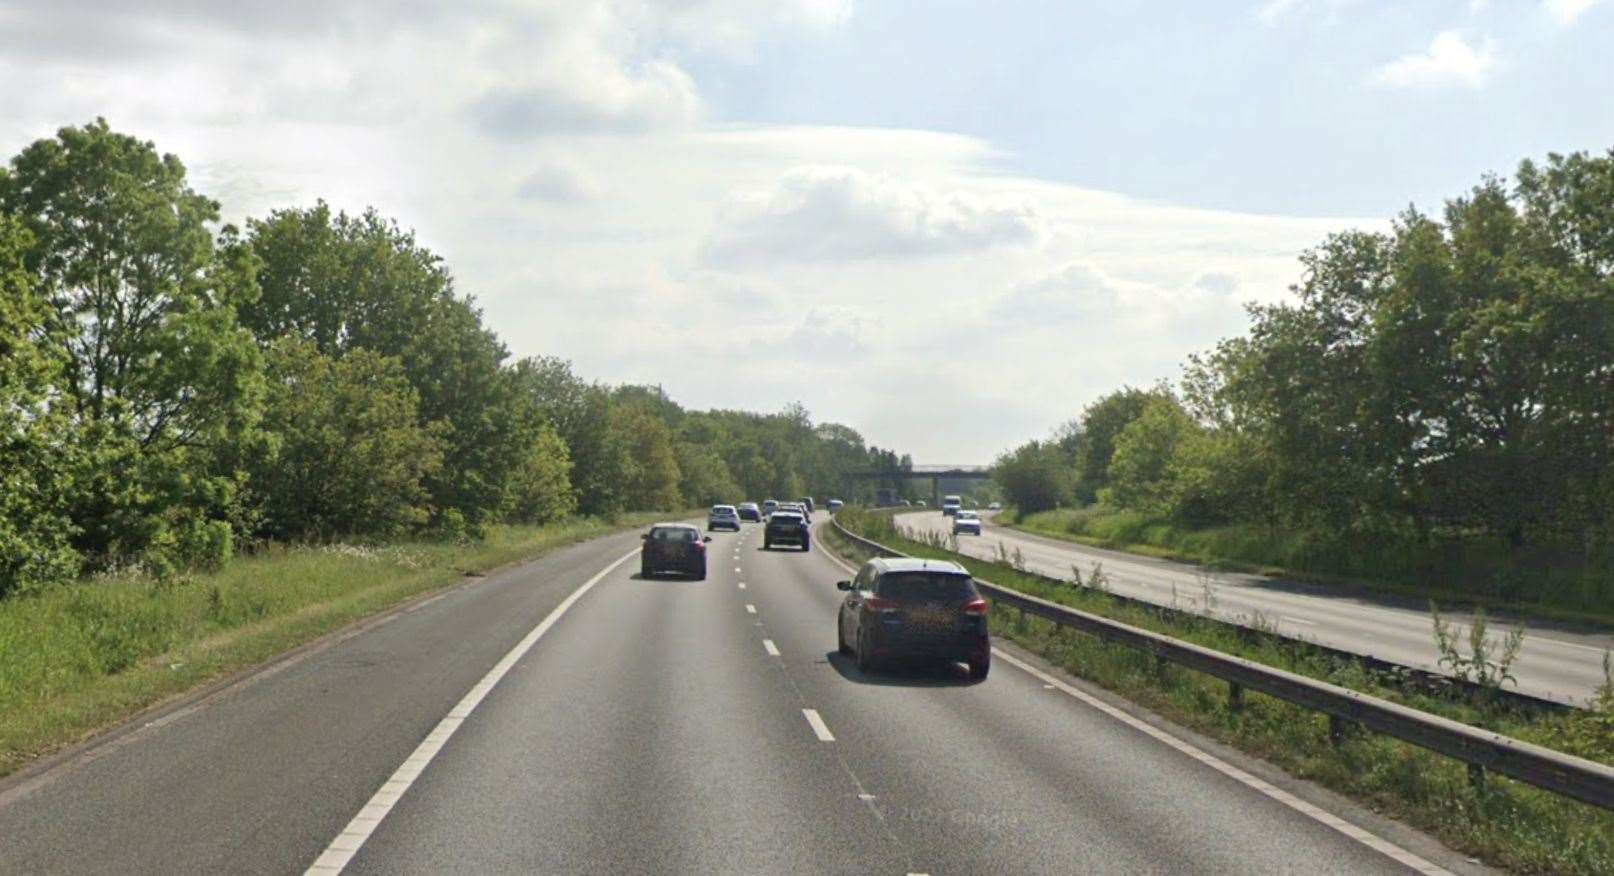 Part of the M2 motorway is closed as overnight repairs are expected to overrun late into the morning. Picture: Google Maps